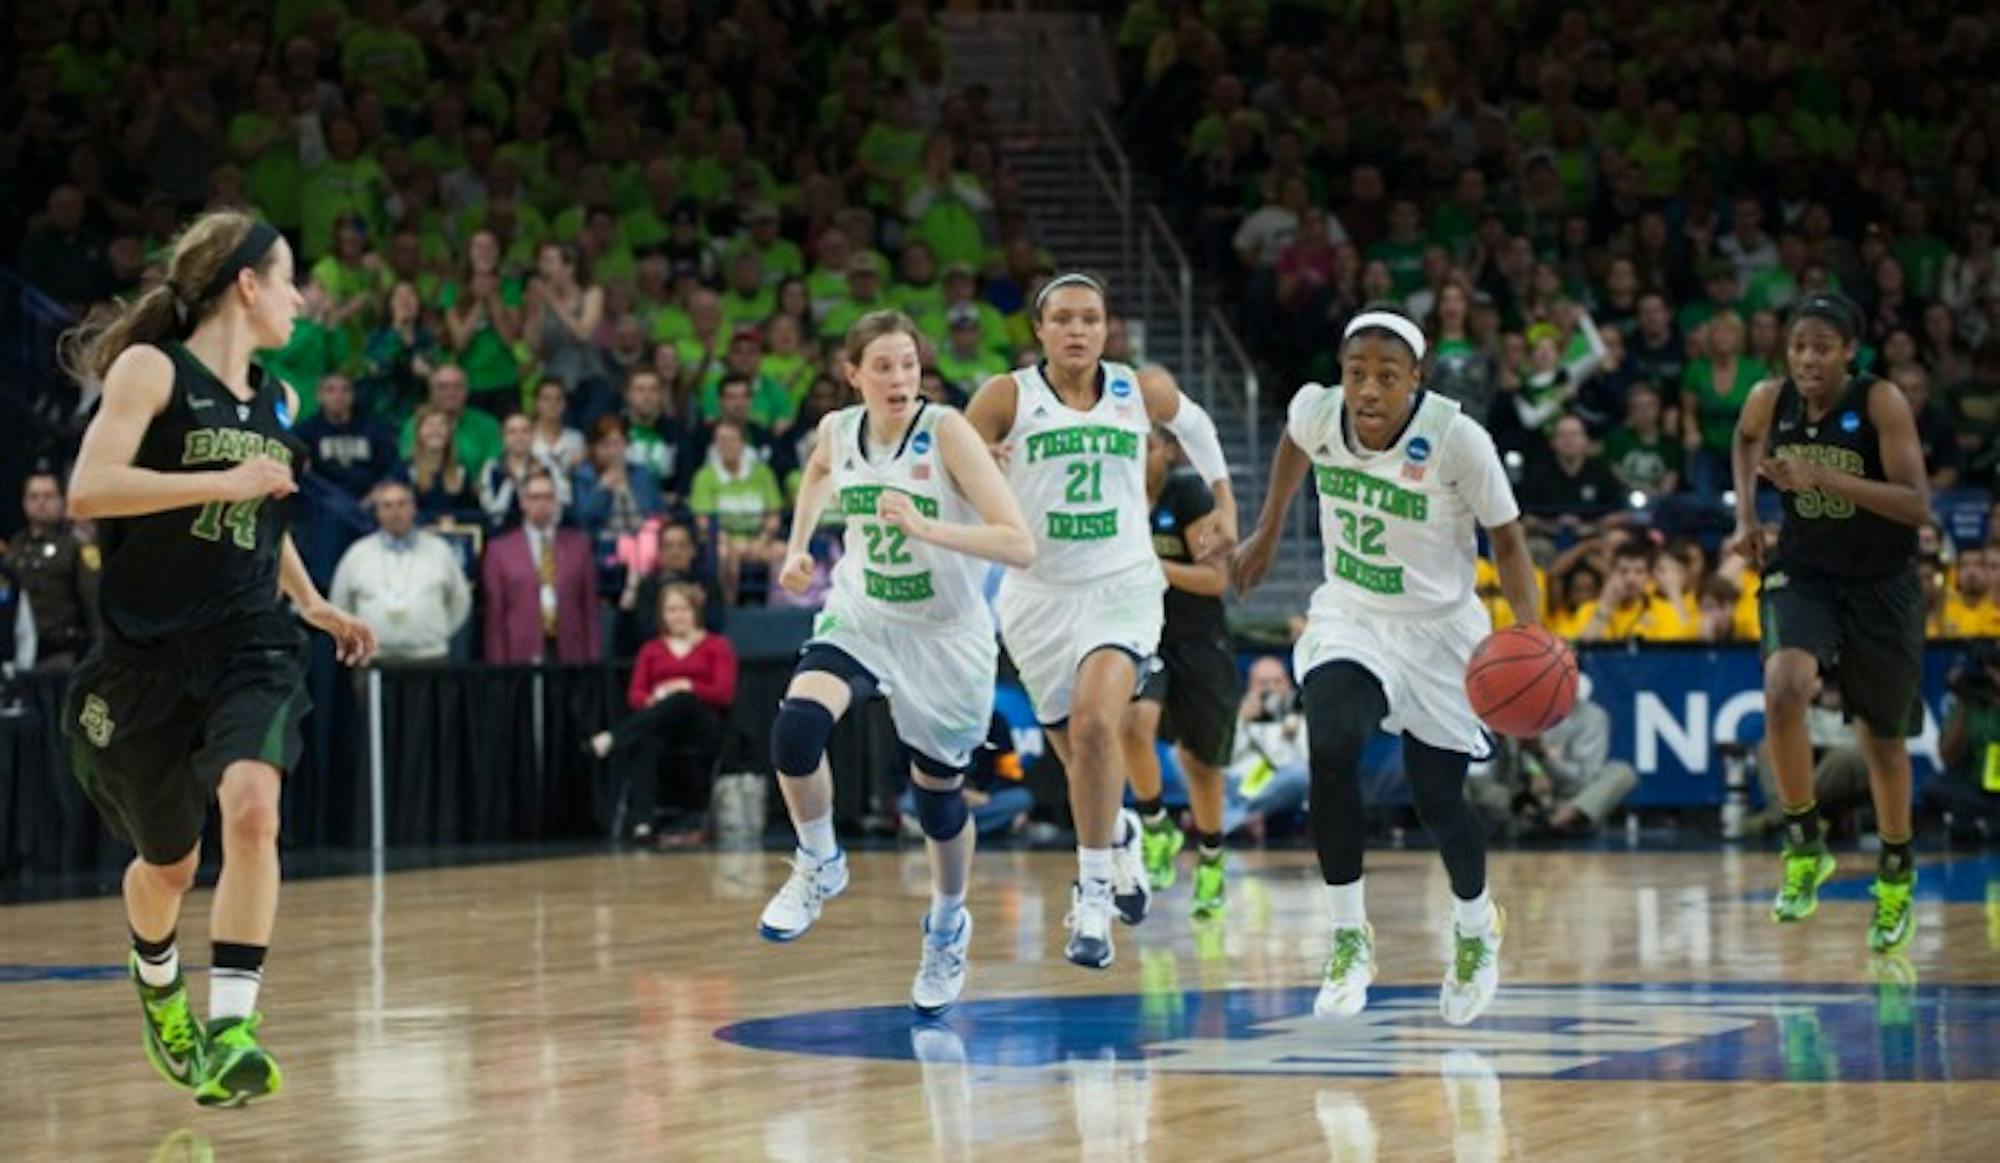 Irish sophomore guard Jewell Loyd races down the court on a fast break during Notre Dame's 88-69 victory over Baylor in the Elite Eight on Monday night. Loyd scored 30 points to lead Notre Dame.